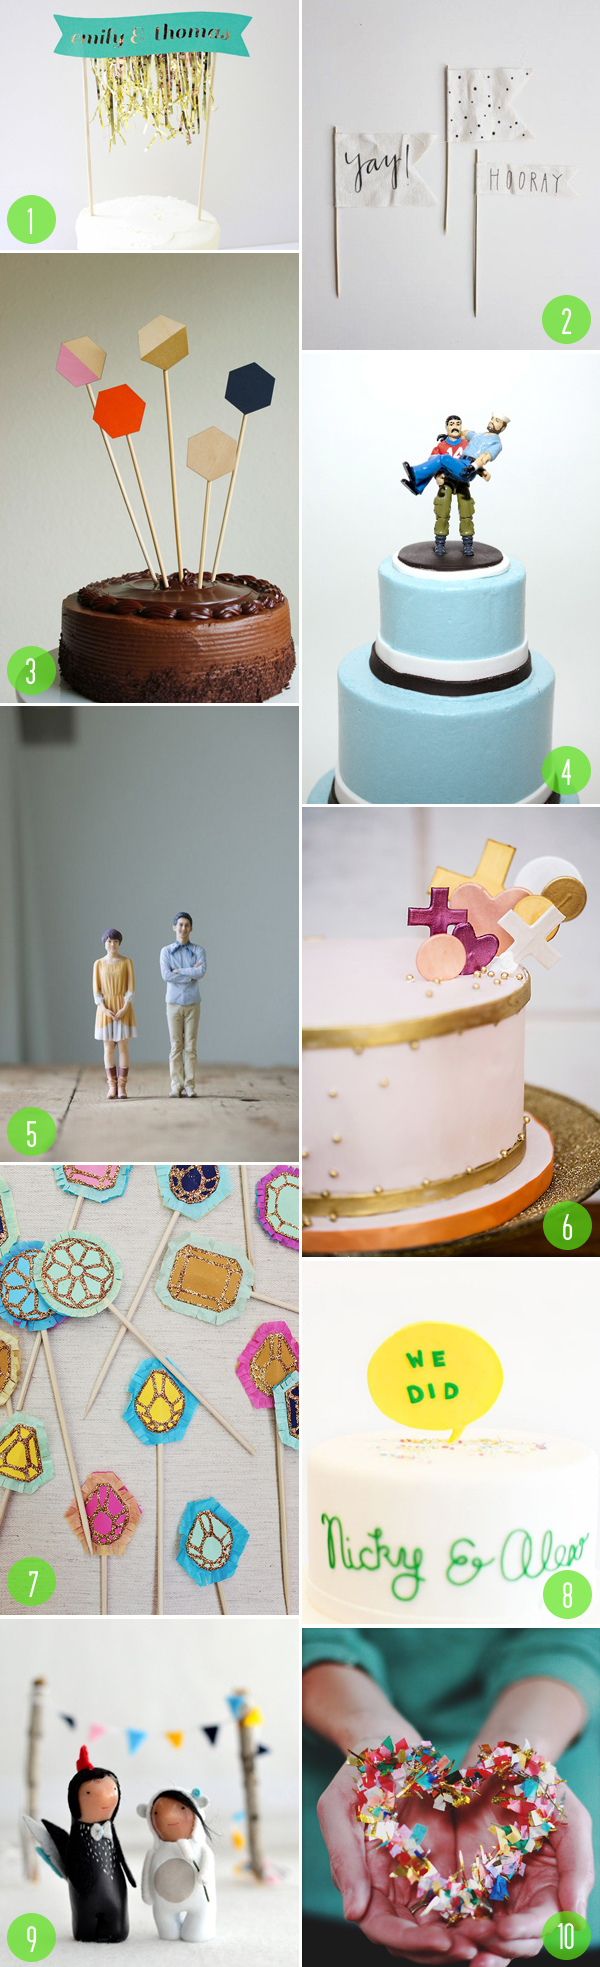 top 10: cake toppers 3